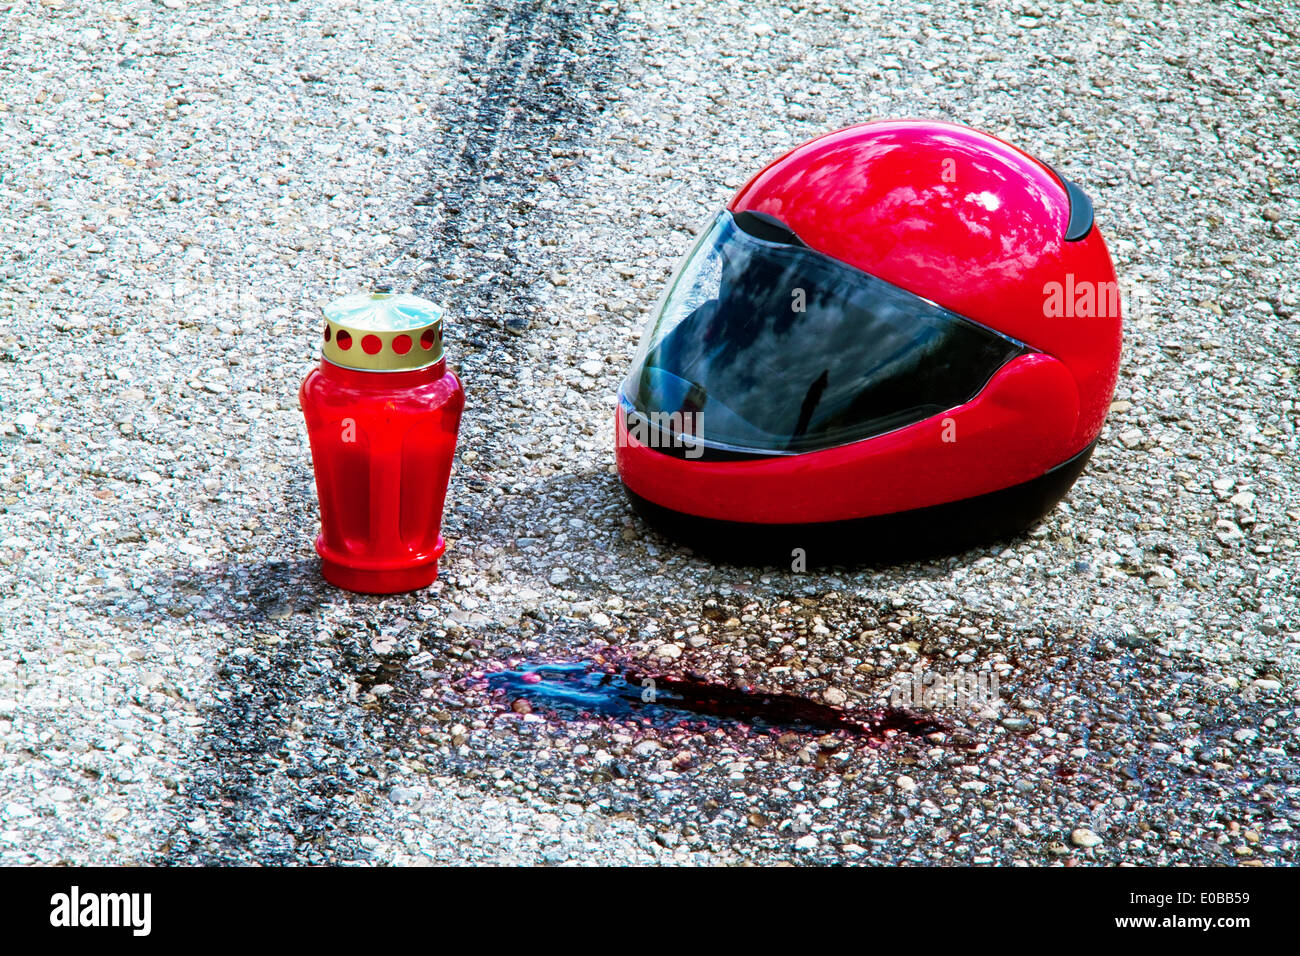 An accident by motorcycle. Traffic accident with skid mark on street. Symbolic photo., Ein Unfall mit Motorrad. Verkehrsunfall m Stock Photo